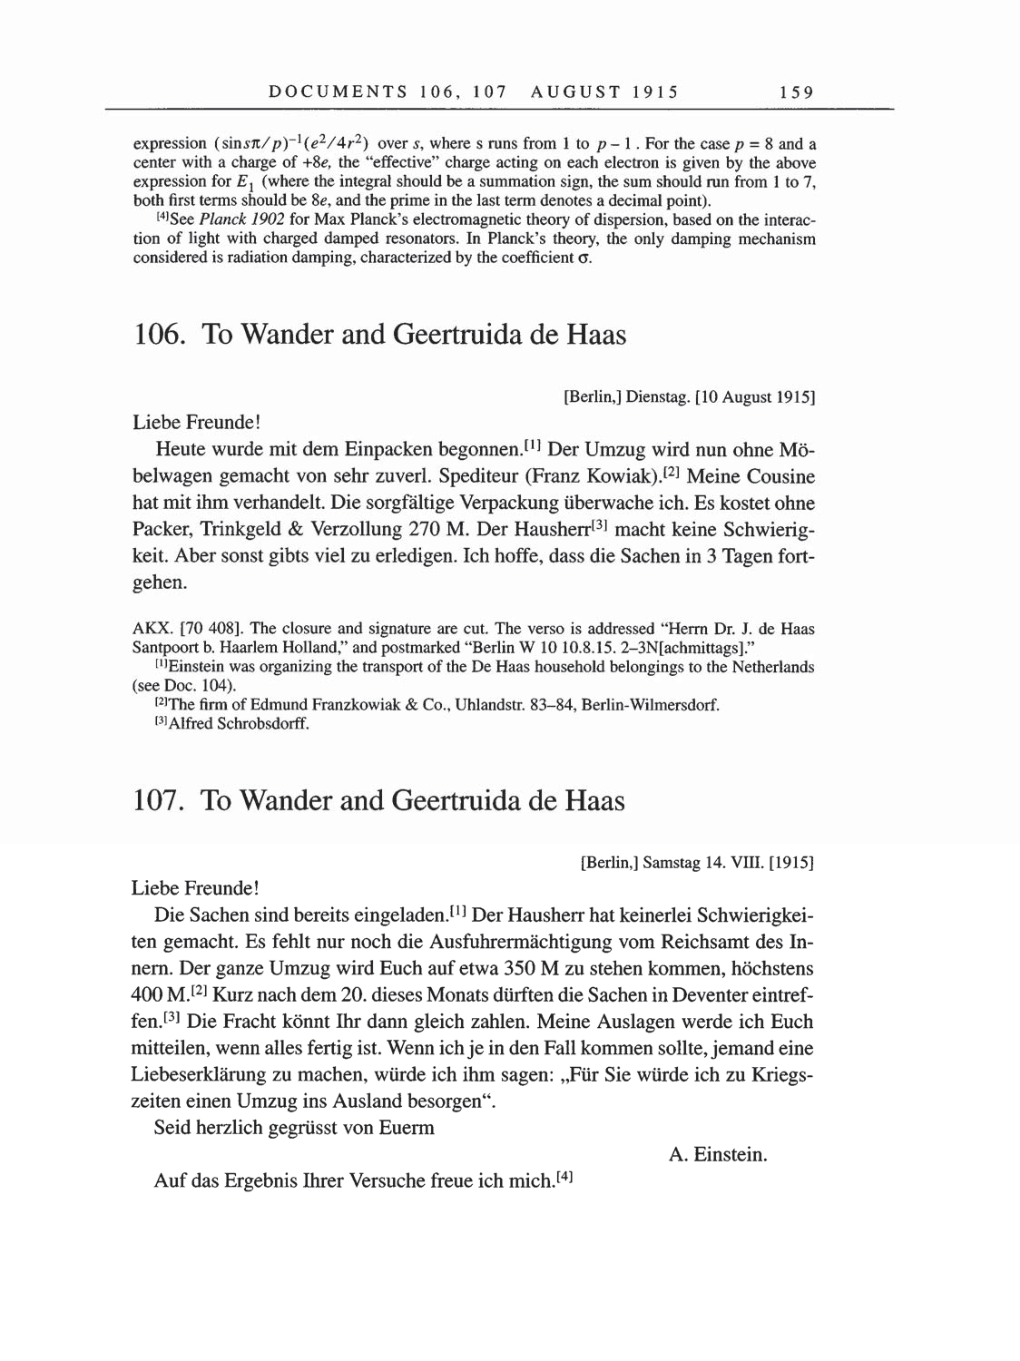 Volume 8, Part A: The Berlin Years: Correspondence 1914-1917 page 159